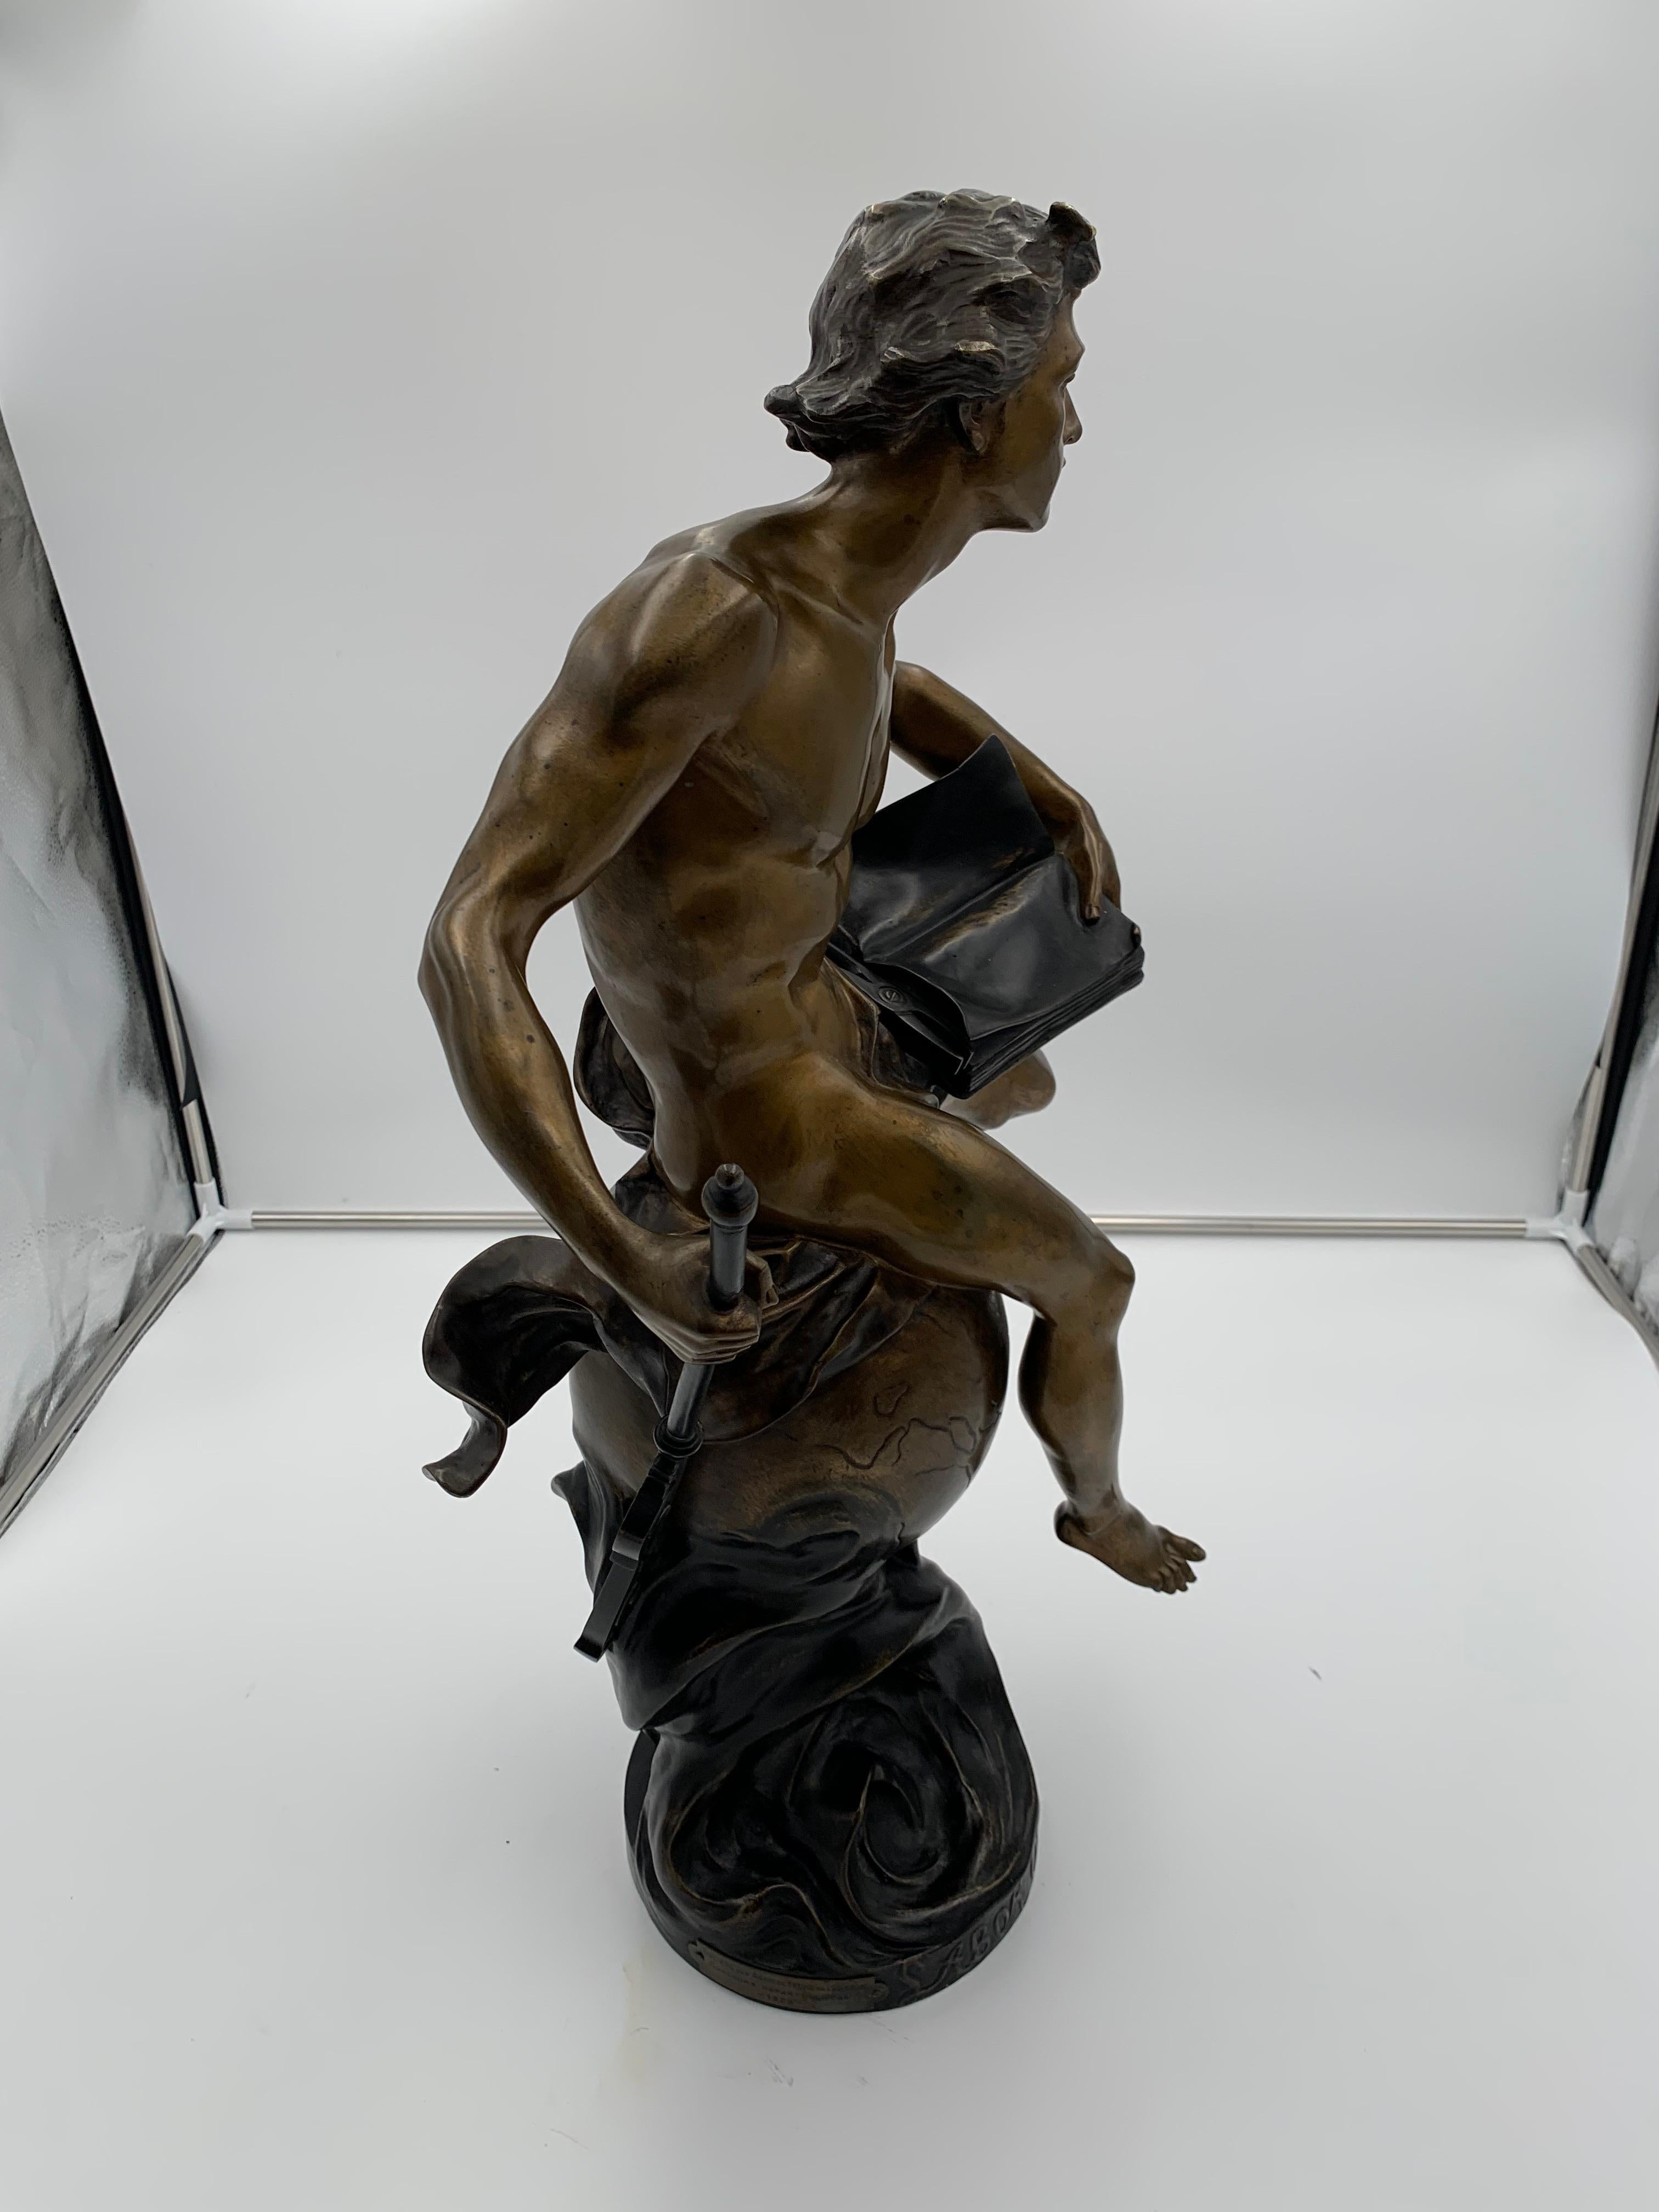 Large version (68 cm high) bronze sculpture of a young man with book and stick titled, Labor Omnia Regit“.

Material: bronze, patinated, in very good condition.
Signed: 